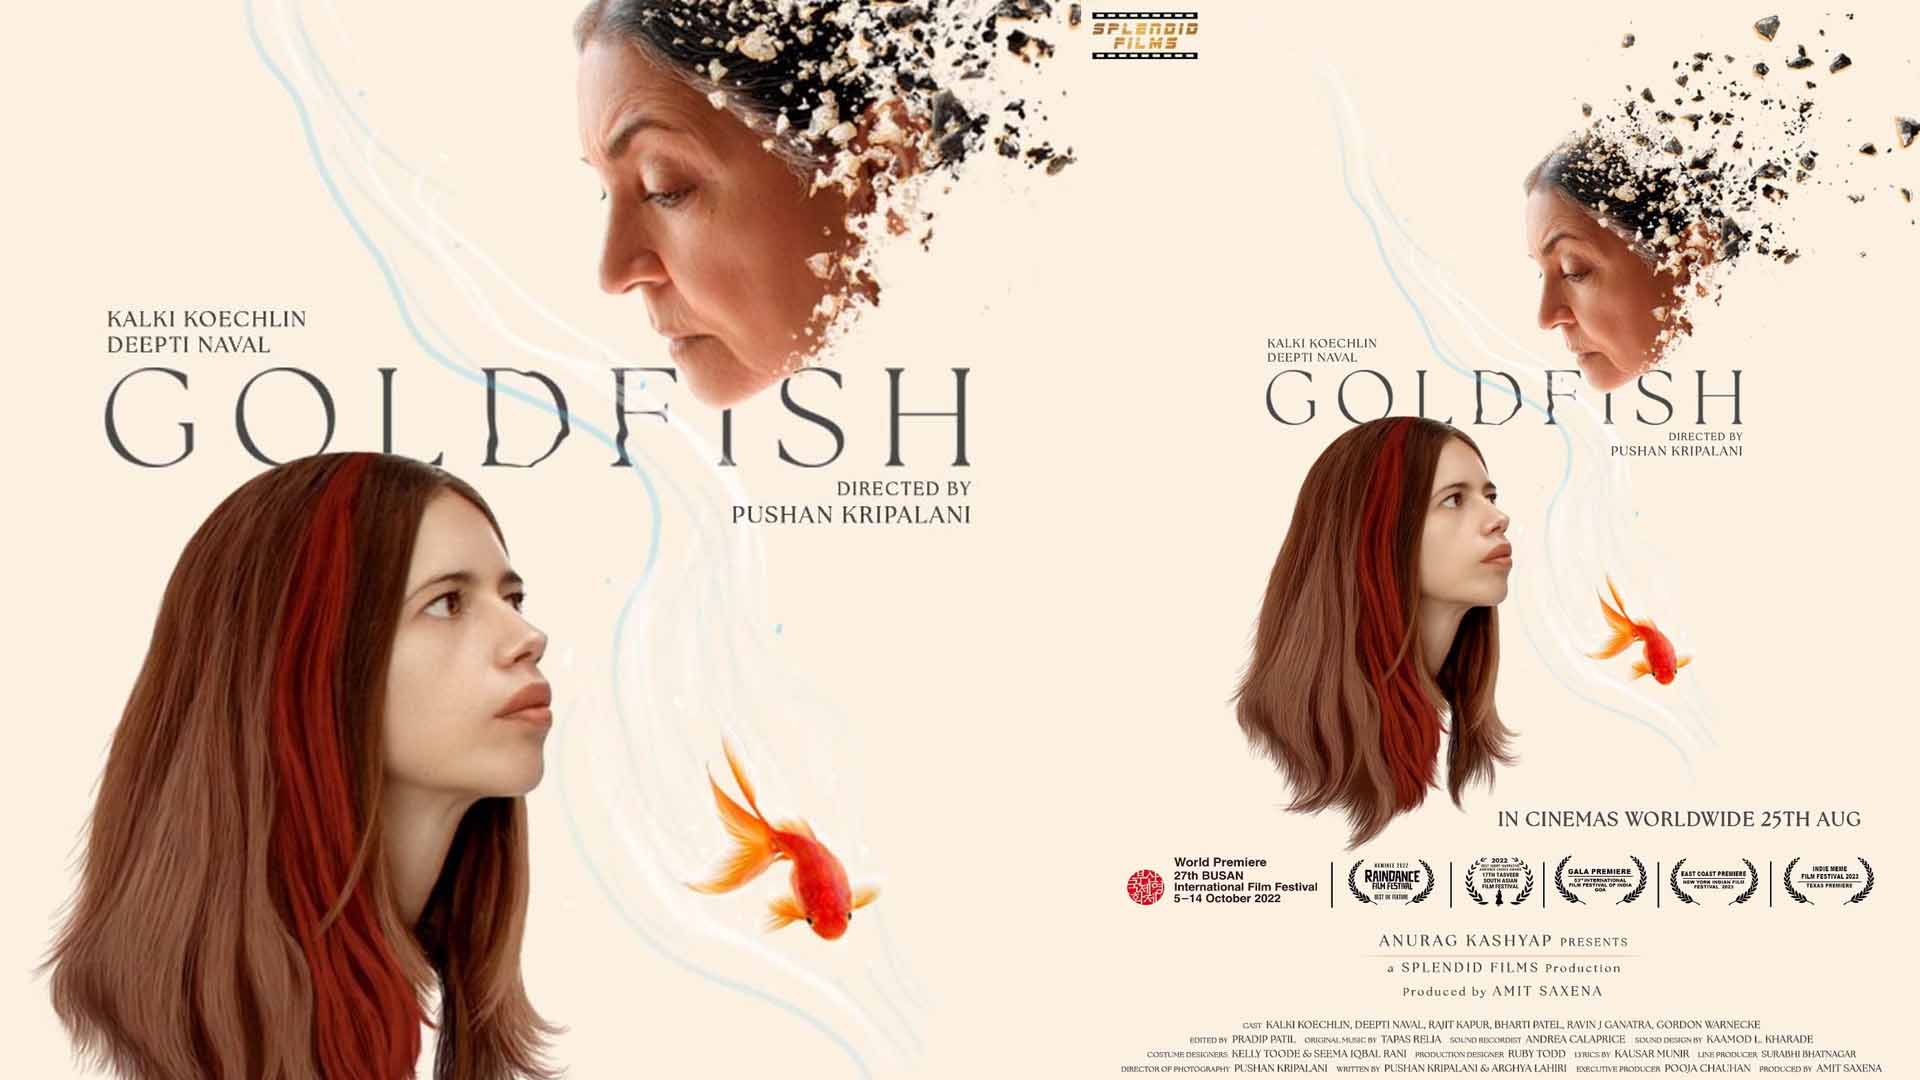 Goldfish releases on 25th August: Here are 5 Kalki Koechlin movies to watch before that!